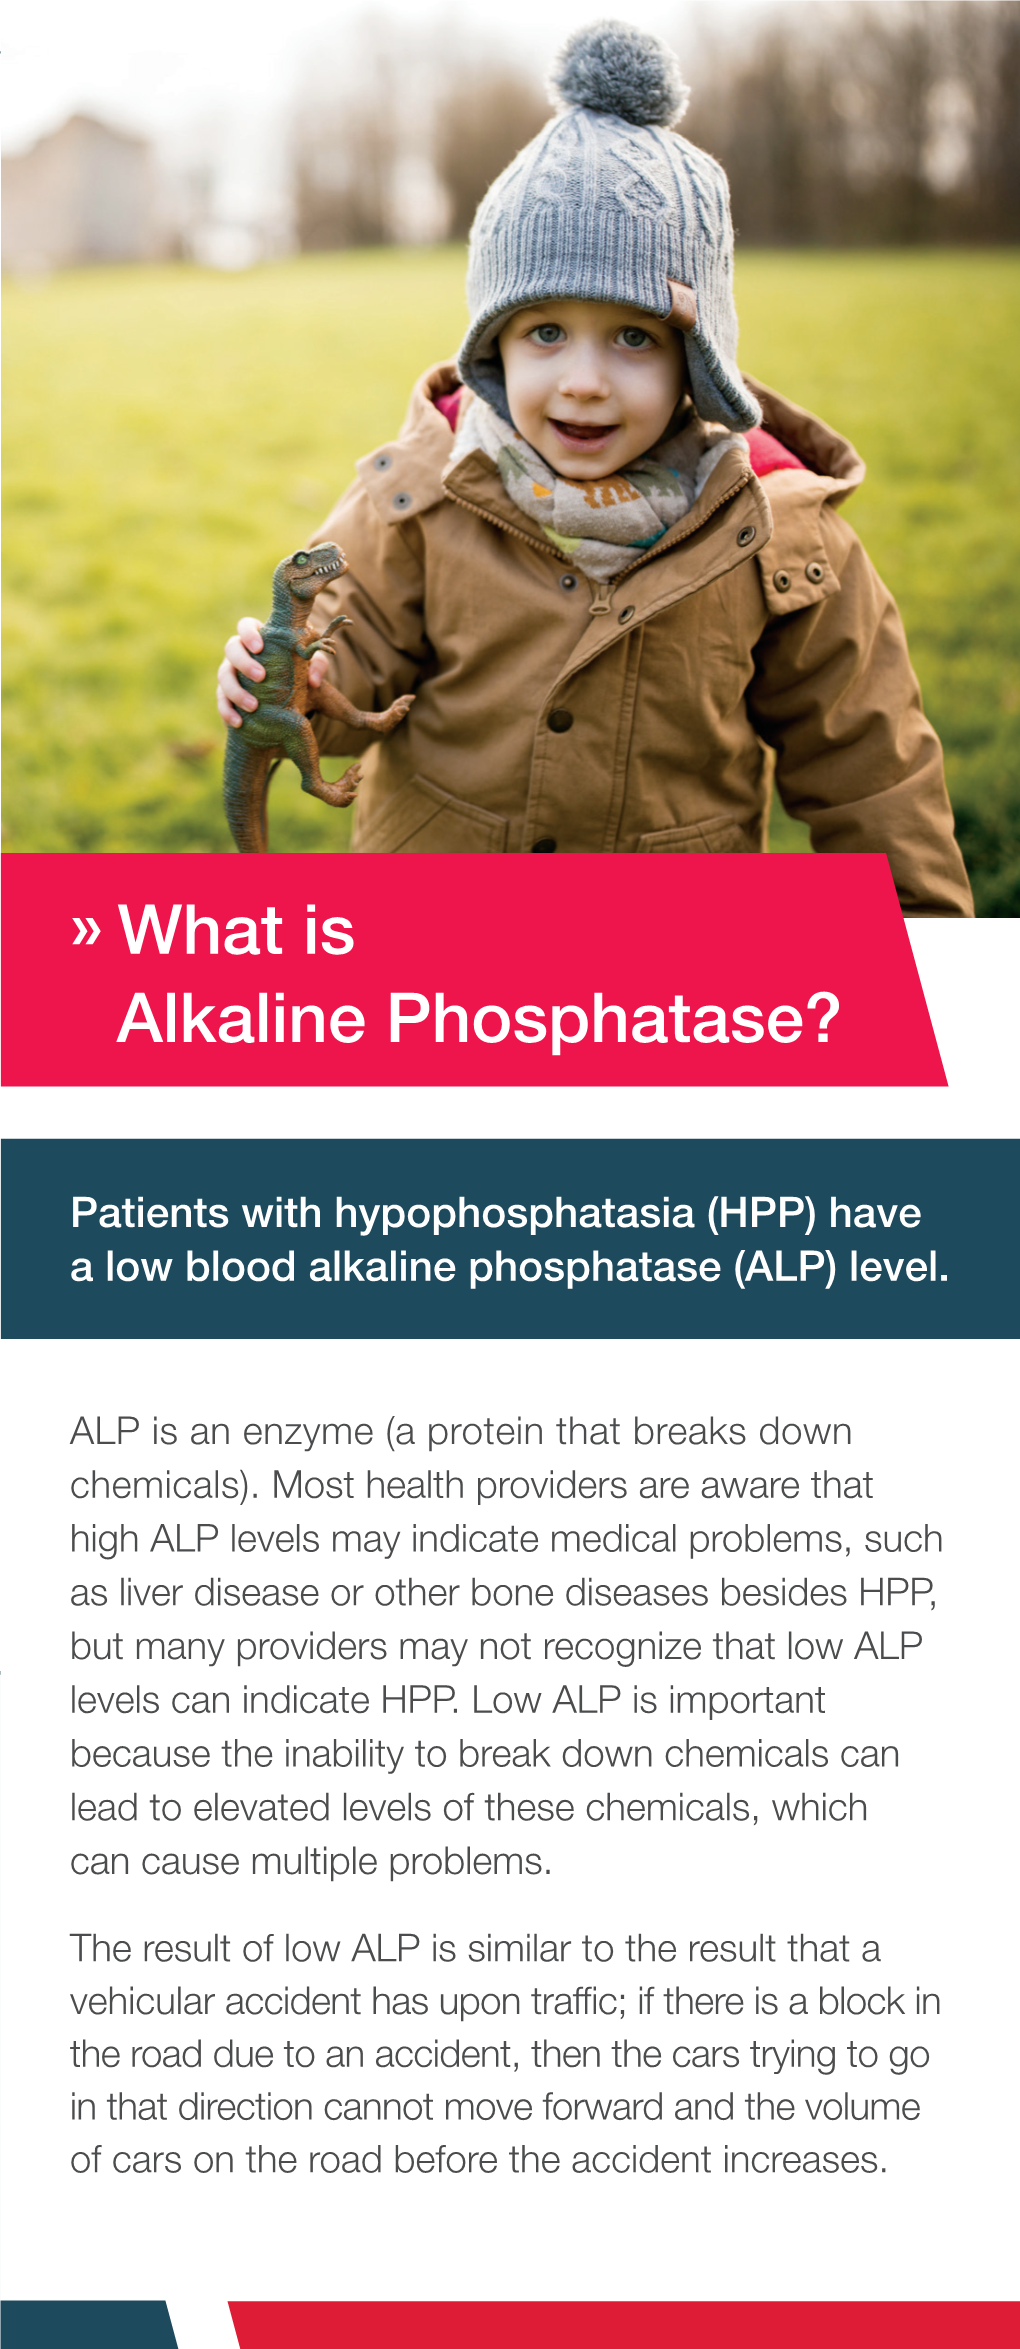 What Is Alkaline Phosphatase? What Are the Symptoms of Low ALP?